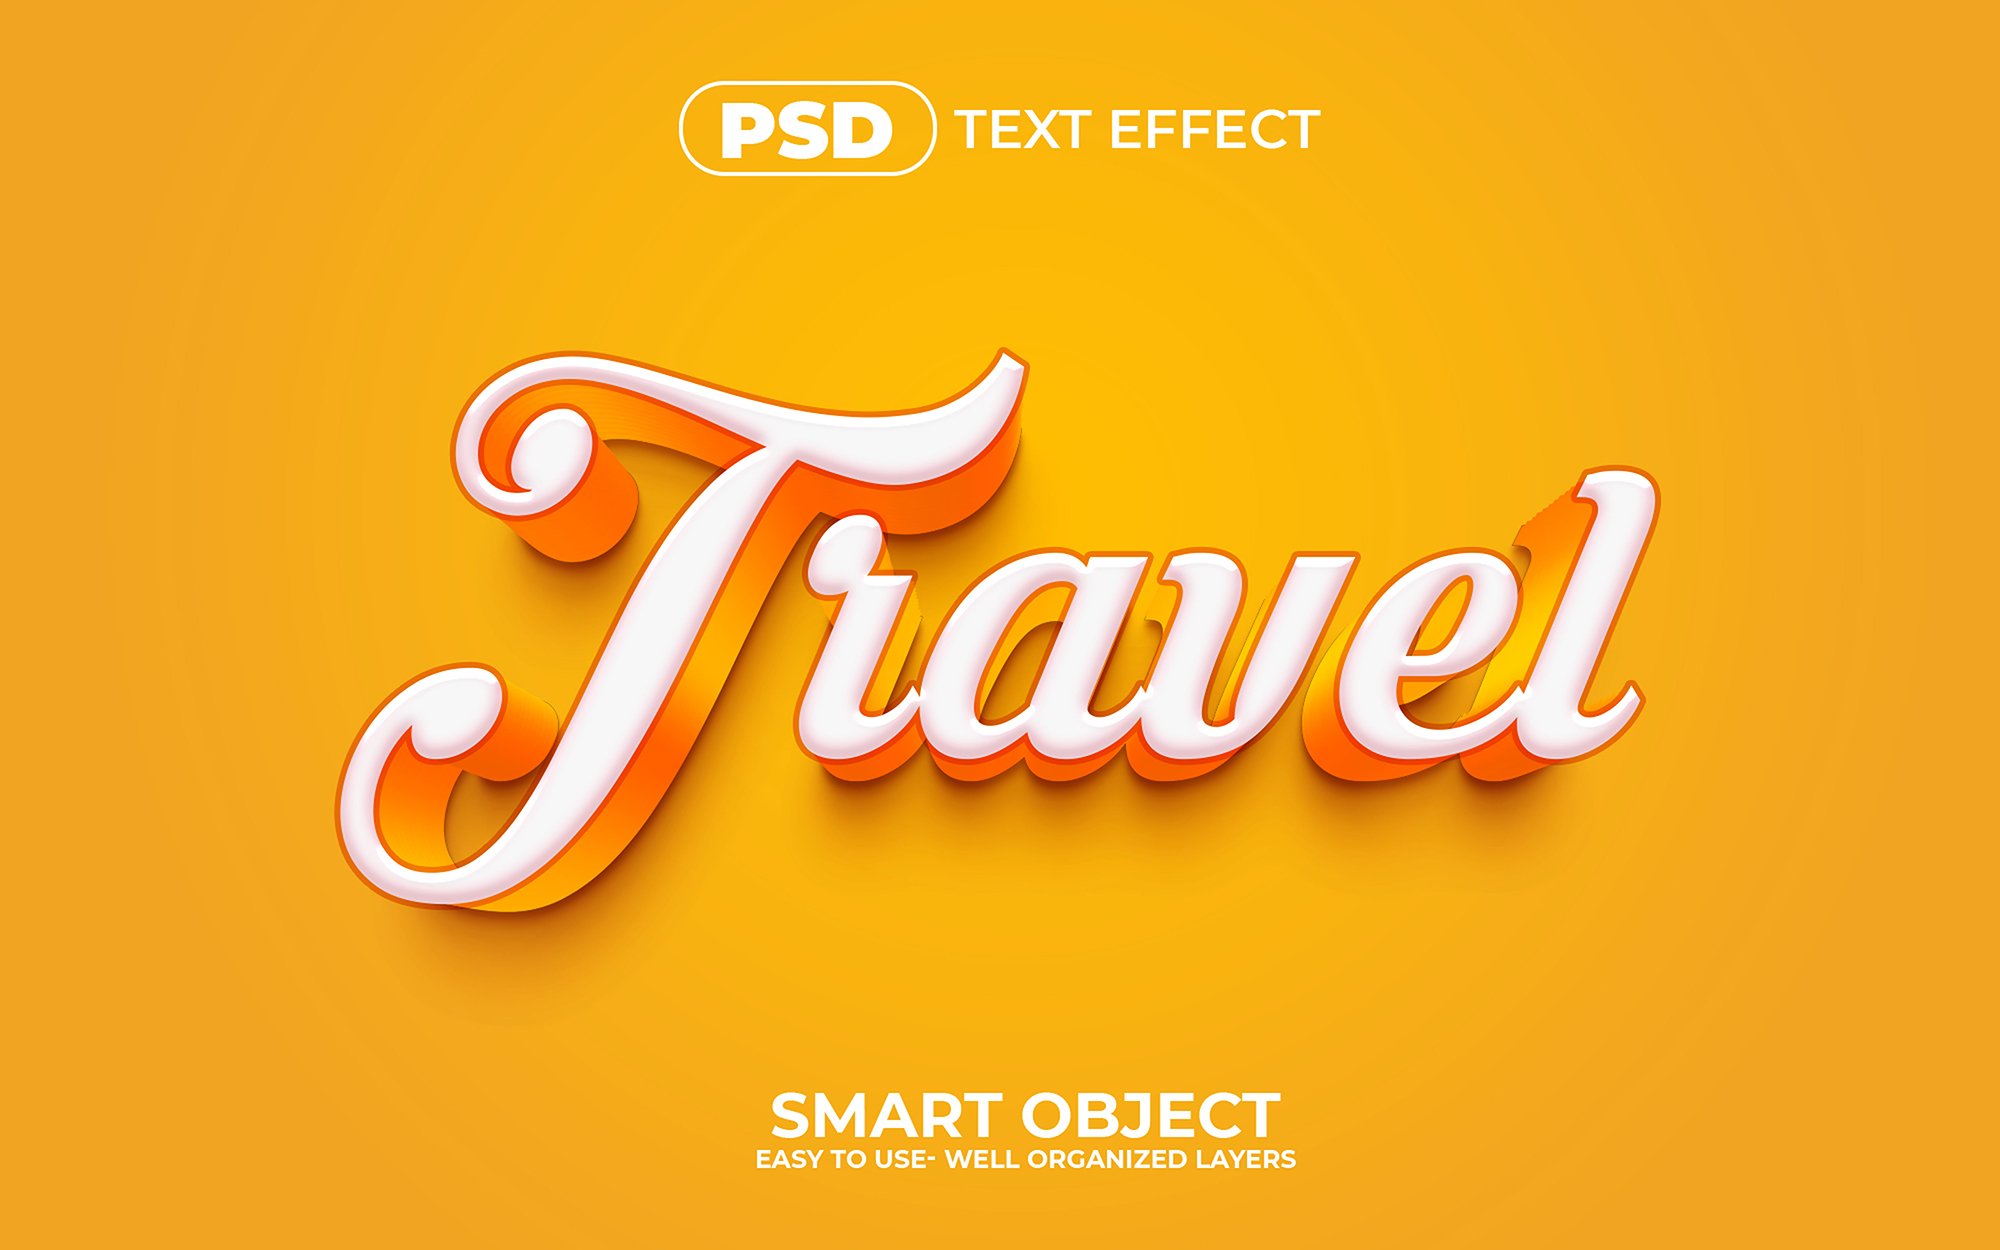 A 3d text effect with the words travel.